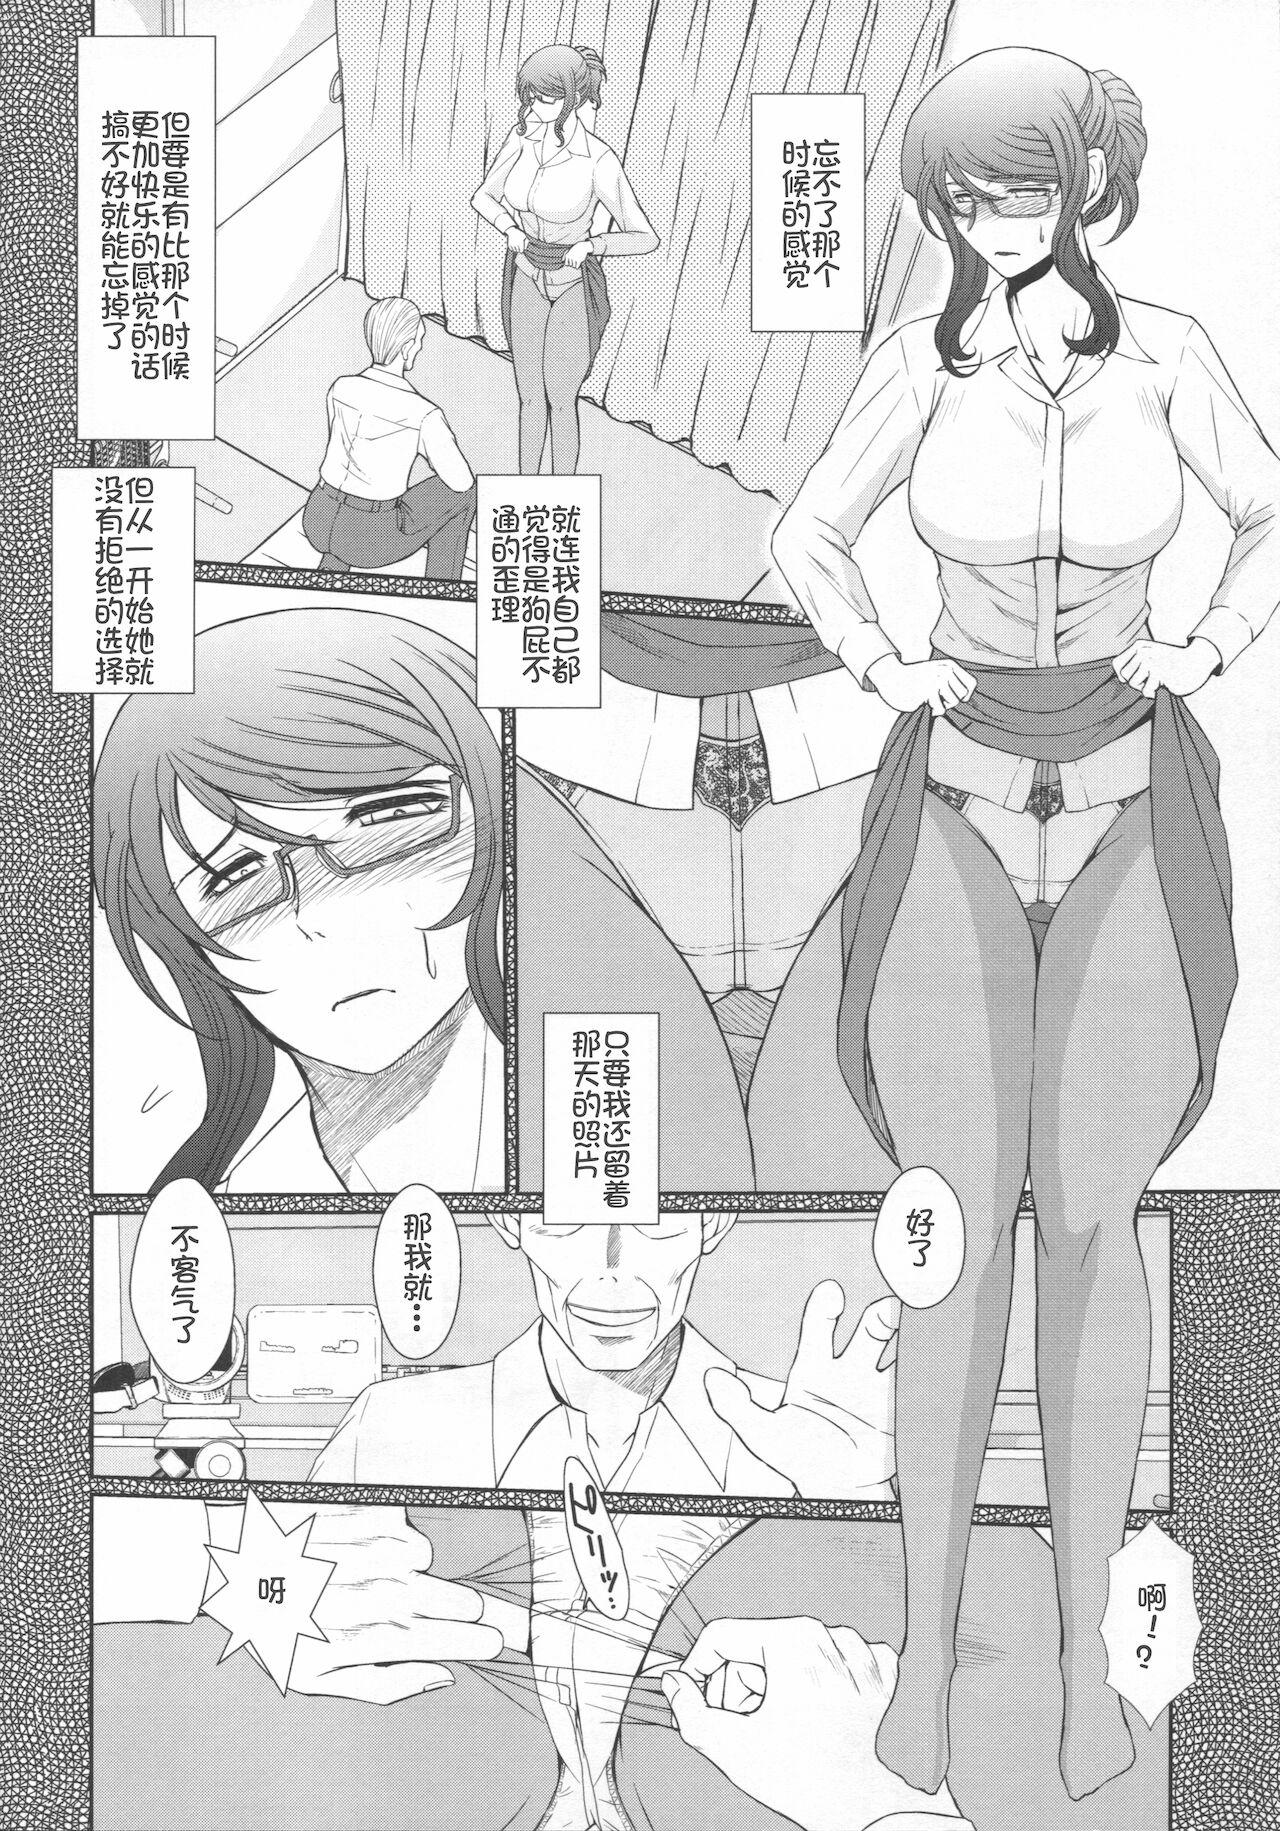 Best Blowjob Ever Zoku Akai Boushi no Onna - Woman with a red cap - Kyuujou lovers Gay Bukkakeboys - Page 6